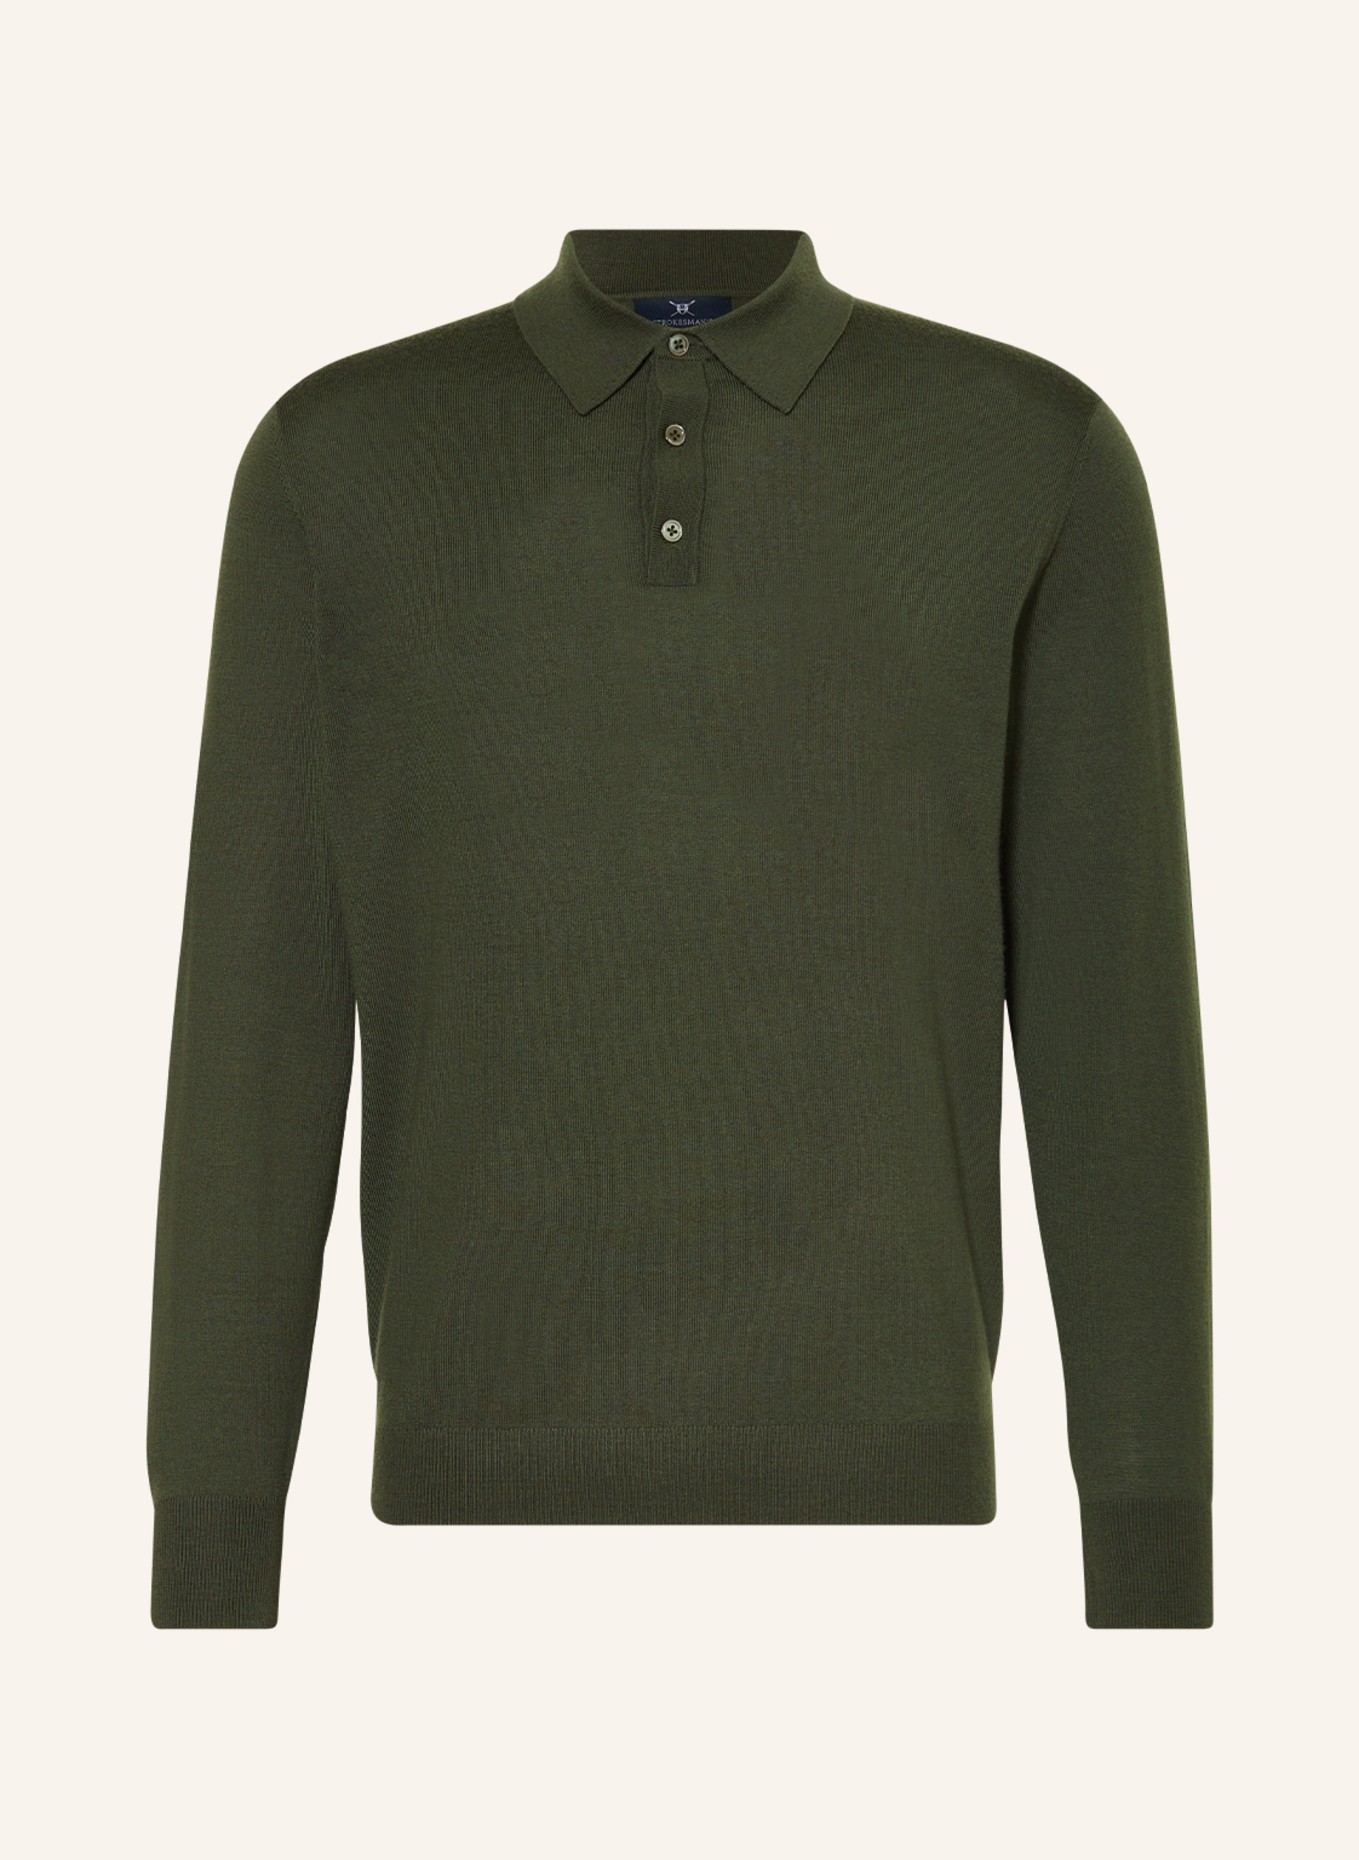 STROKESMAN'S Knitted polo shirt made of merino wool, Color: OLIVE (Image 1)